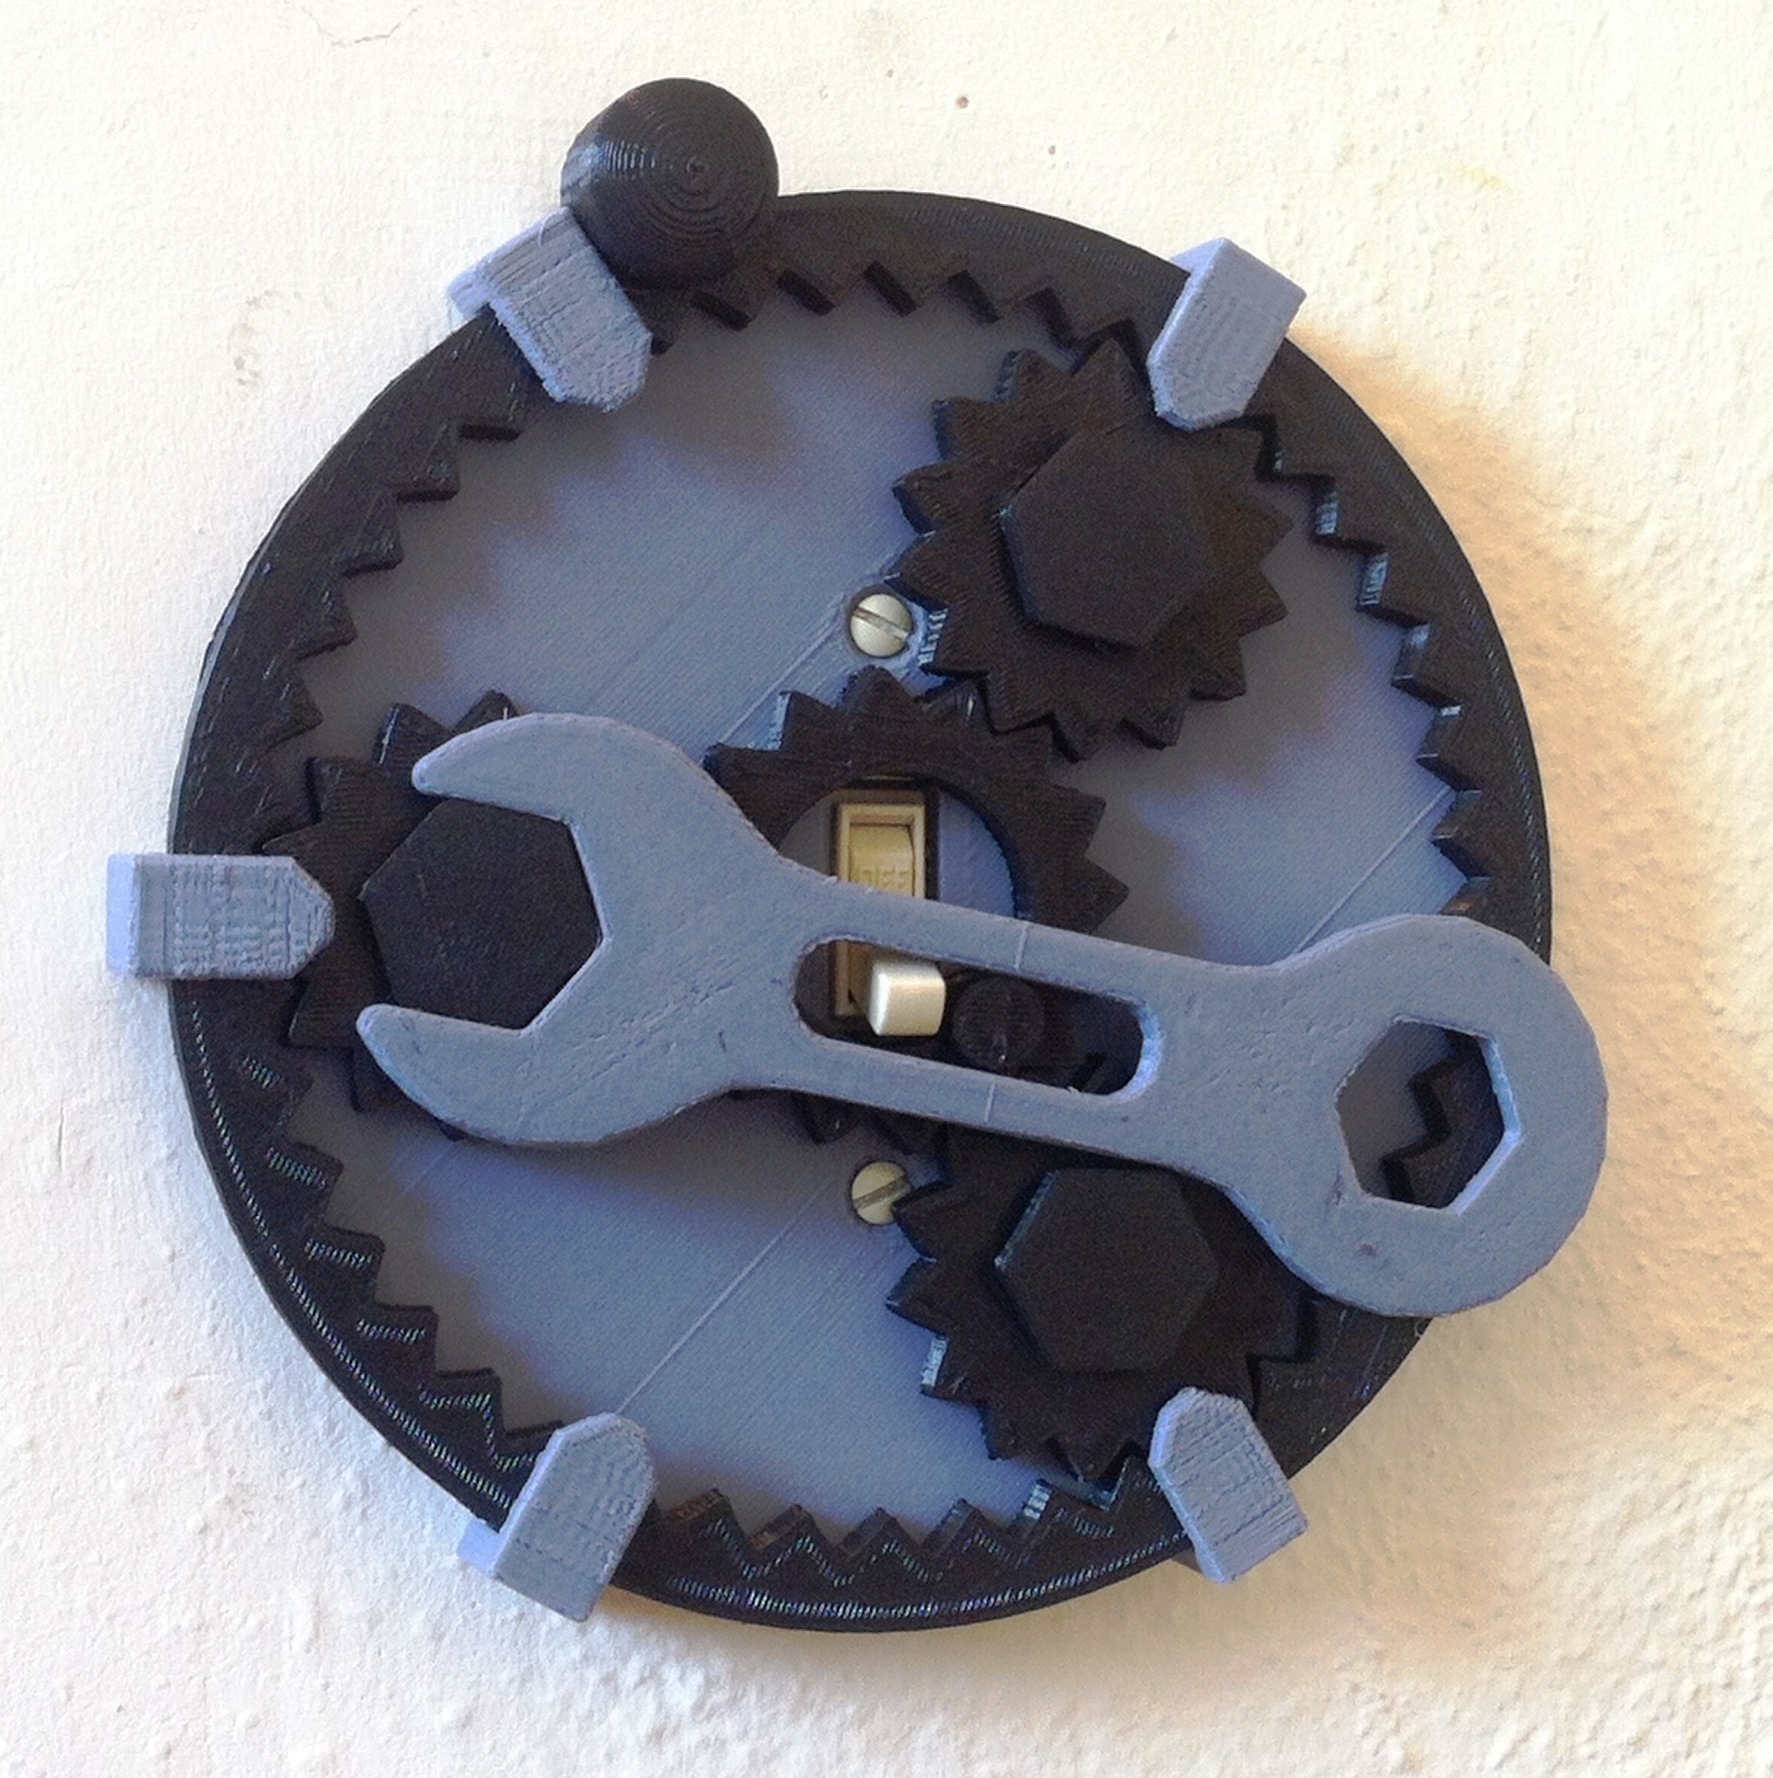 3D Printed Gear Light Switch Cover by Michael Graham